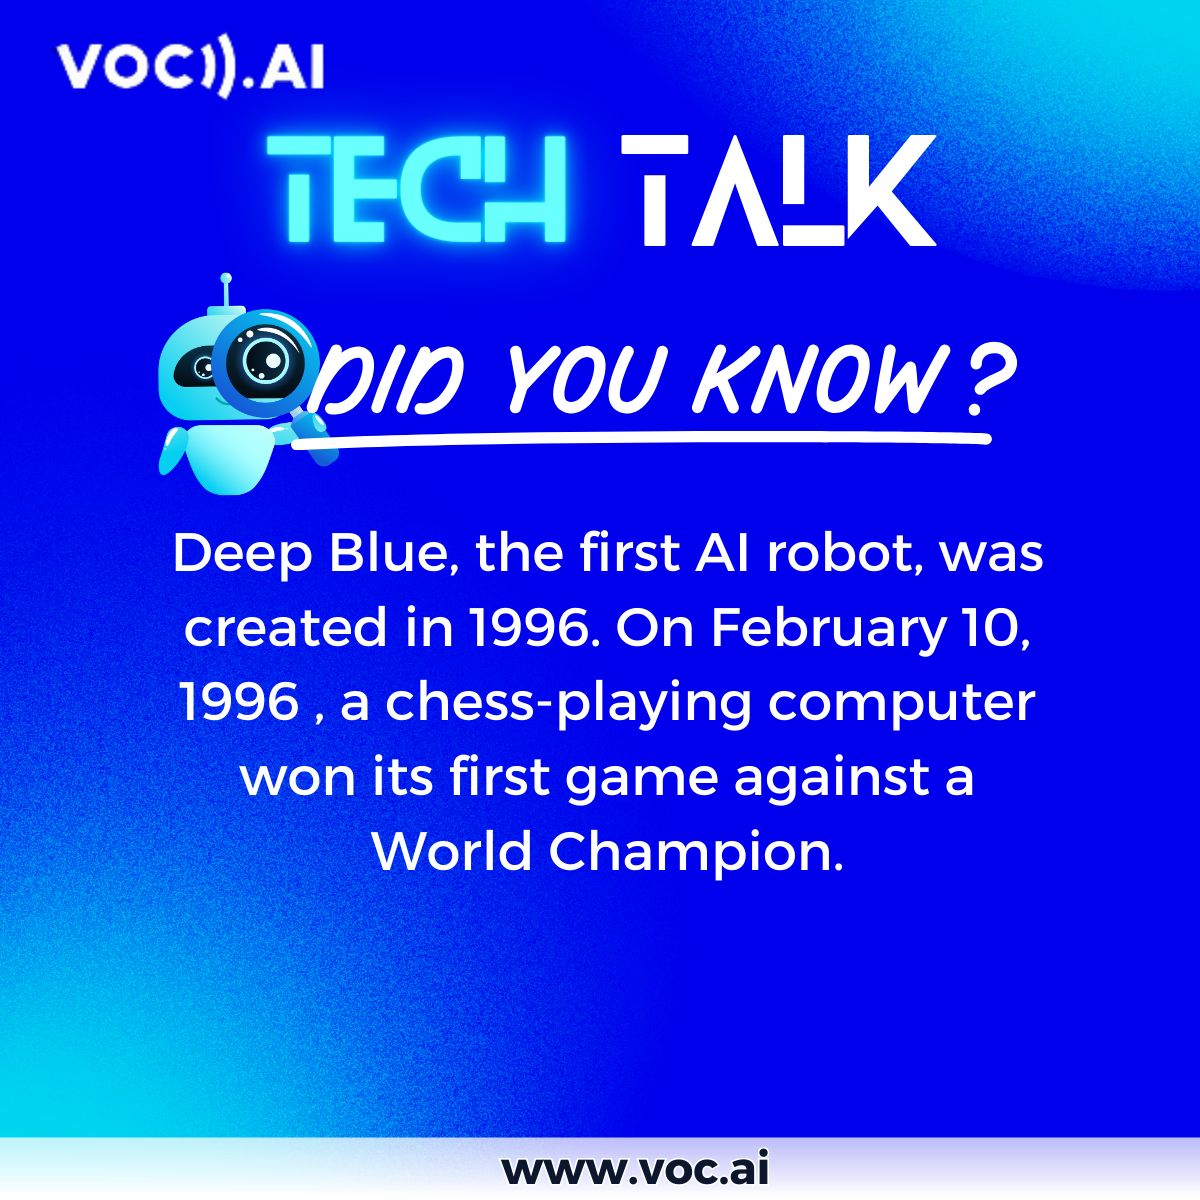 TECH TALK Sunday! 🤖 🔍 Did you know that? 🤔 The victory by Deep Blue marked a significant milestone in the development of artificial intelligence and computer chess. 🎉🏆 Follow VOC.AI for more TECH TALKS! ✨👉 voc.ai #techtalk #sundaytrivia